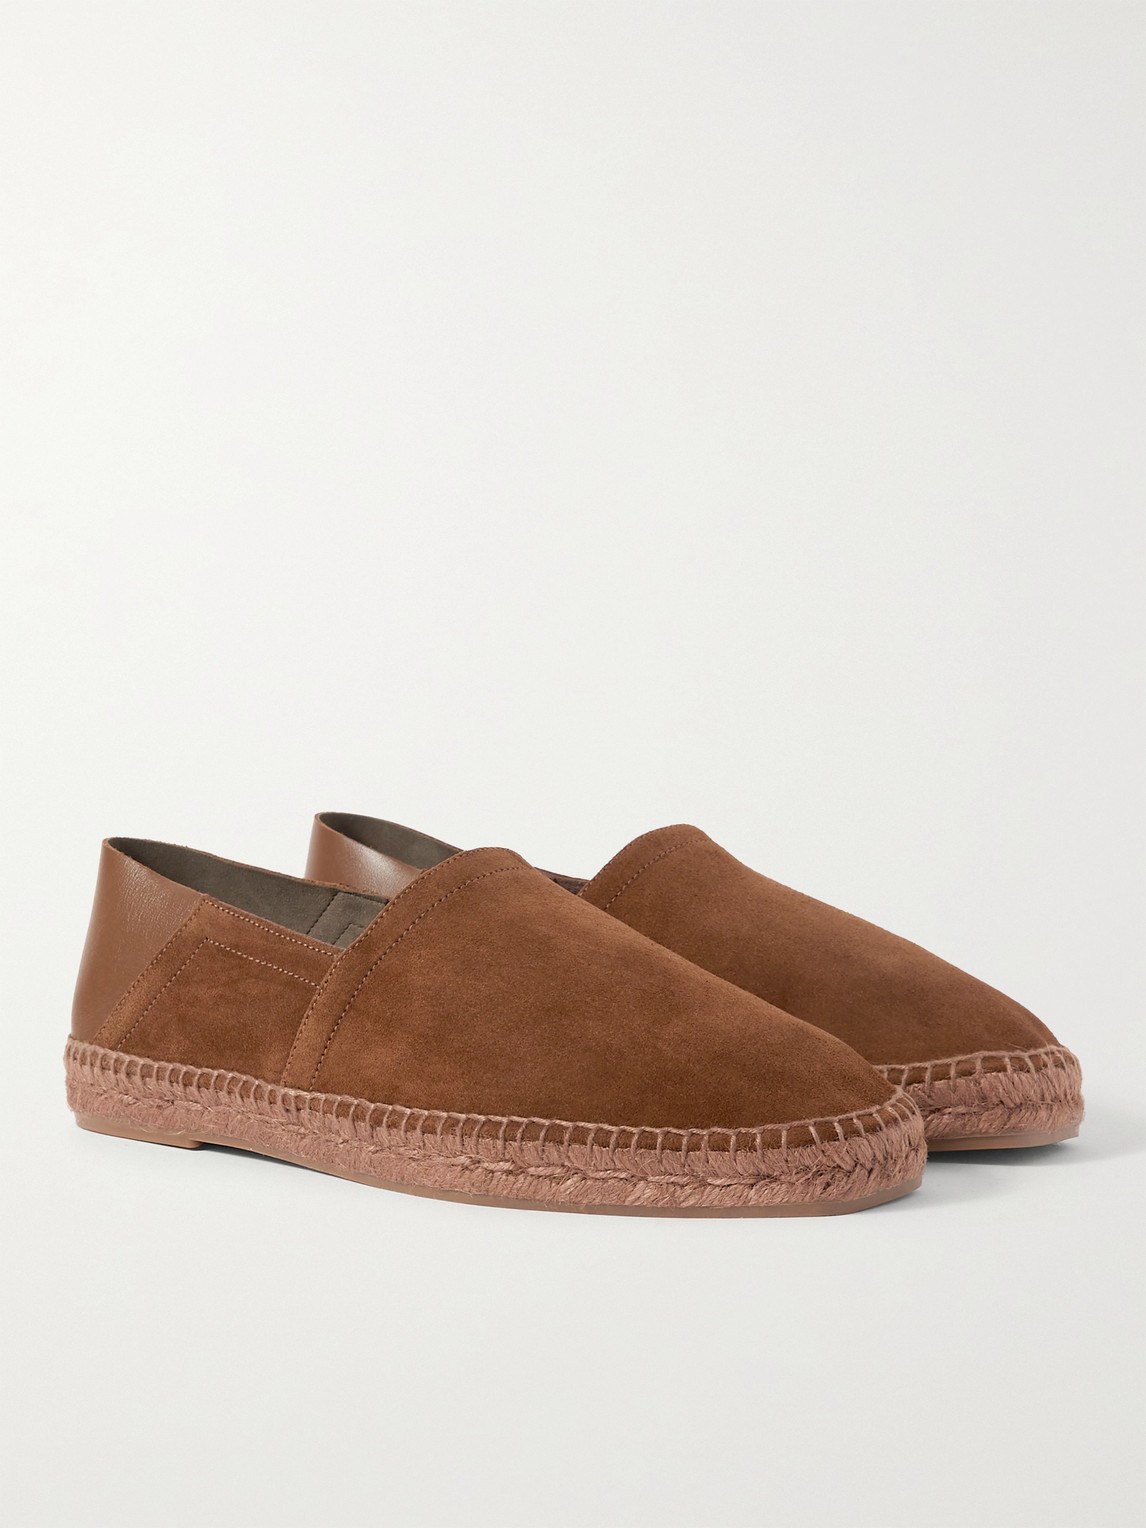 TOM FORD BARNES COLLAPSIBLE-HEEL LEATHER-TRIMMED SUEDE ESPADRILLES